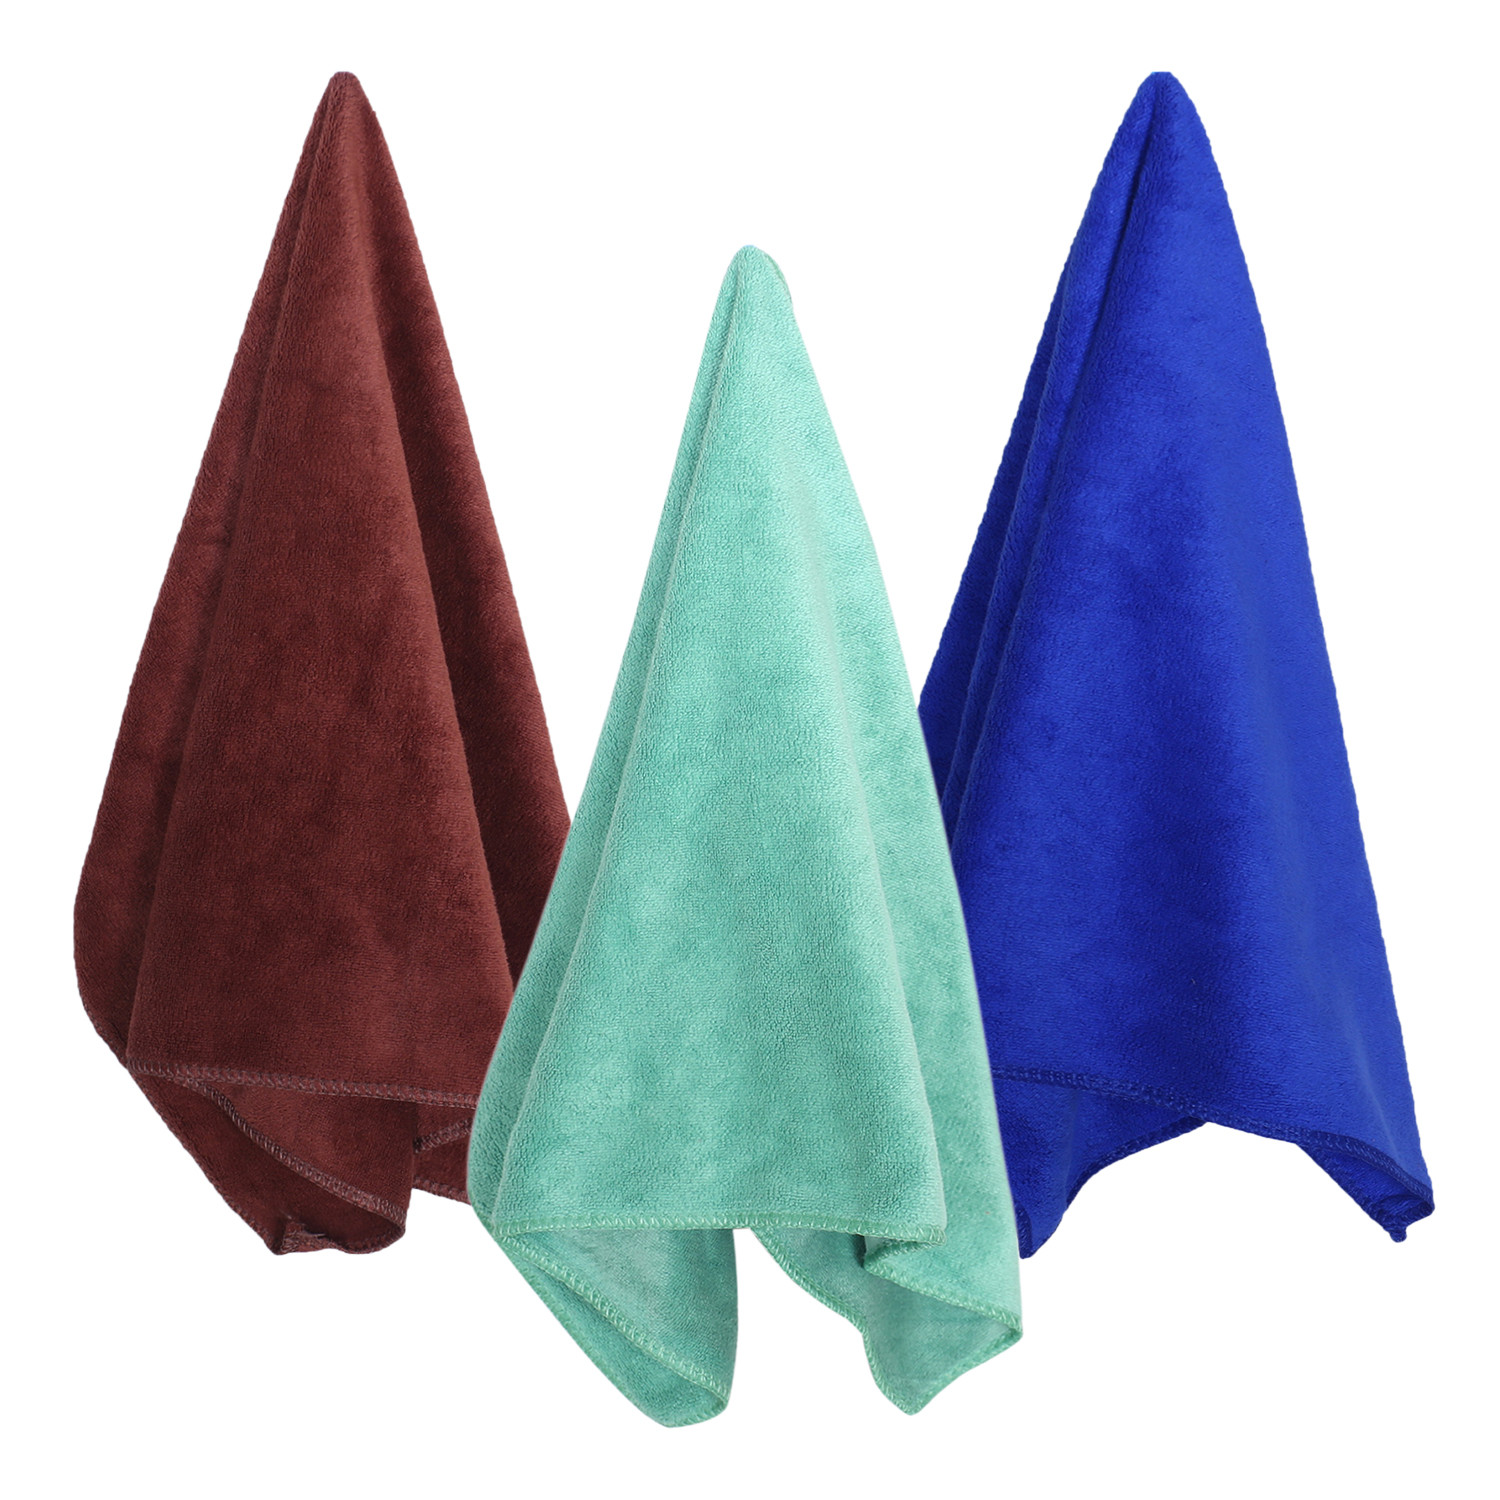 Kuber Industries Cleaning Cloths|Microfiber Highly Absorbent Wash Towels for Kitchen,Car,Window,24 x 16 Inch,Pack of 3 (Green,Brown & Blue)